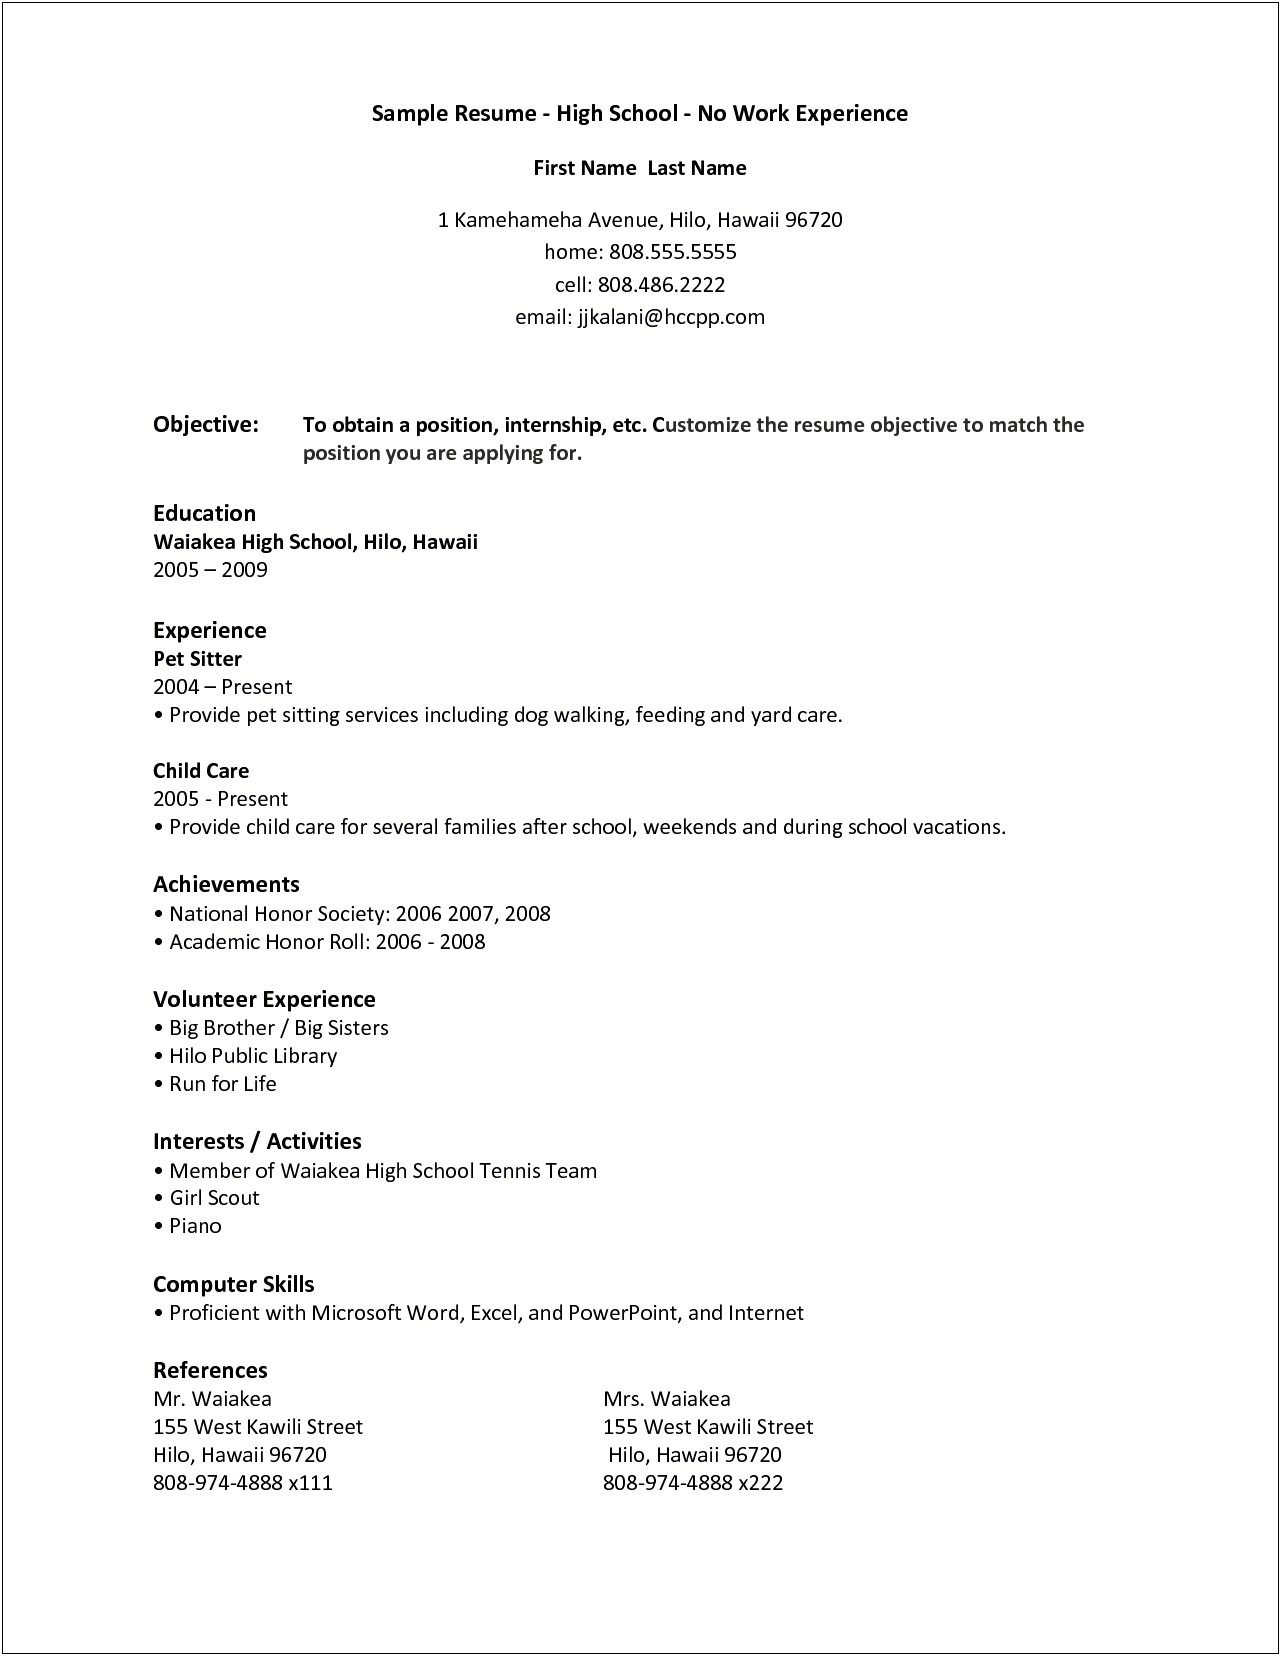 Sample Resume For Teenager With Little Work Experience